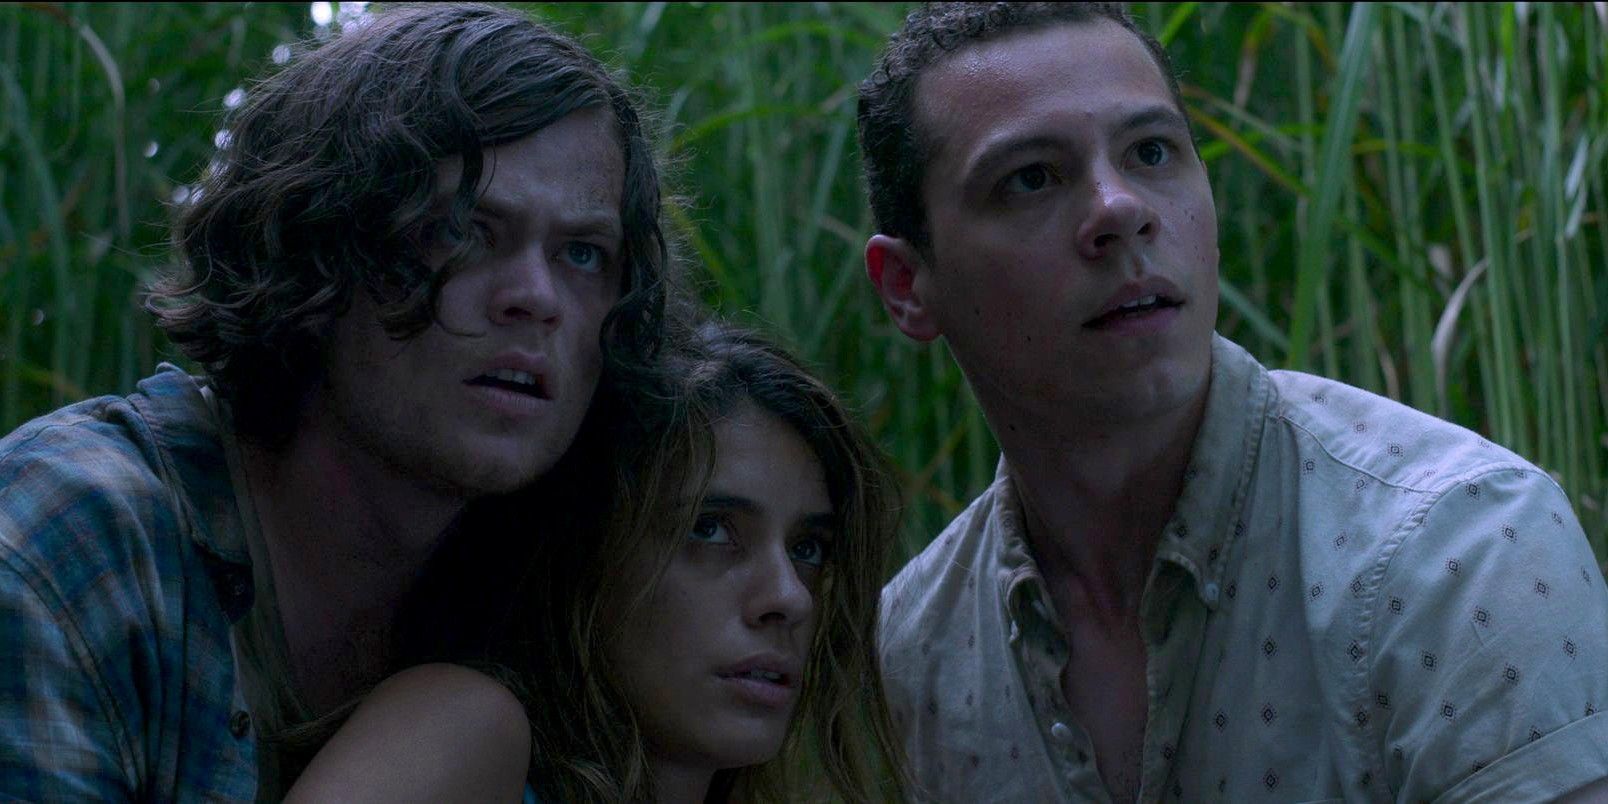 Harrison Gilbertson, Laysla De Oliveira, and Avery Whitted from In the Tall Grass